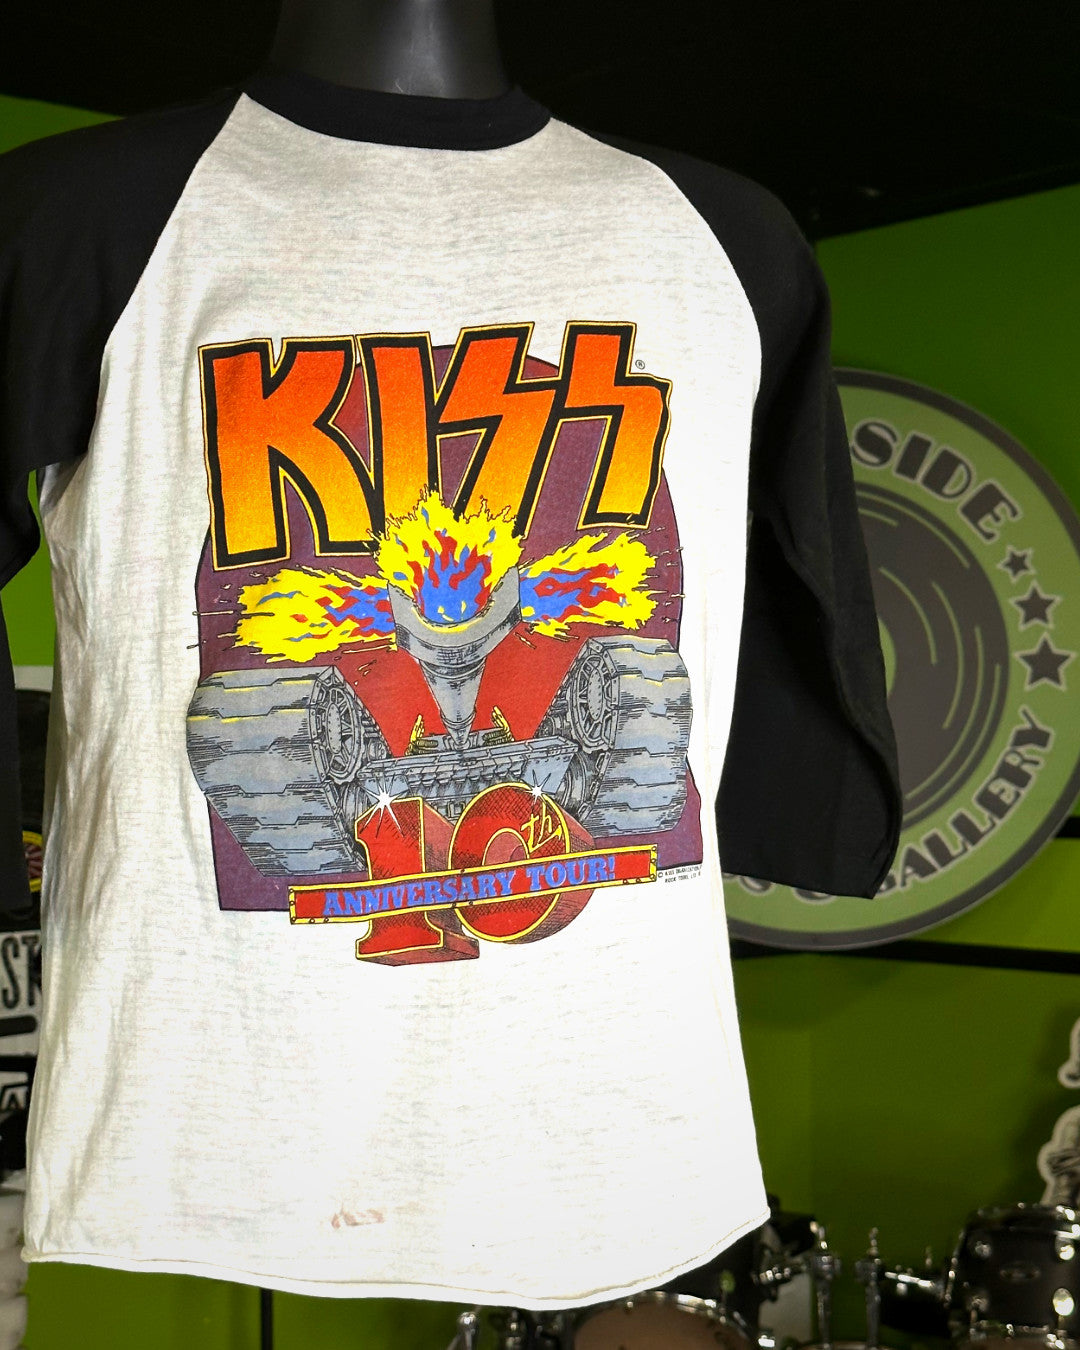 Kiss 1982 10th Anniversary Raglan/Baseball T-Shirt, White w/Black Arms, S (Tagged L)(Measures 25” Long, 18” Pit To Pit) - Darkside Records